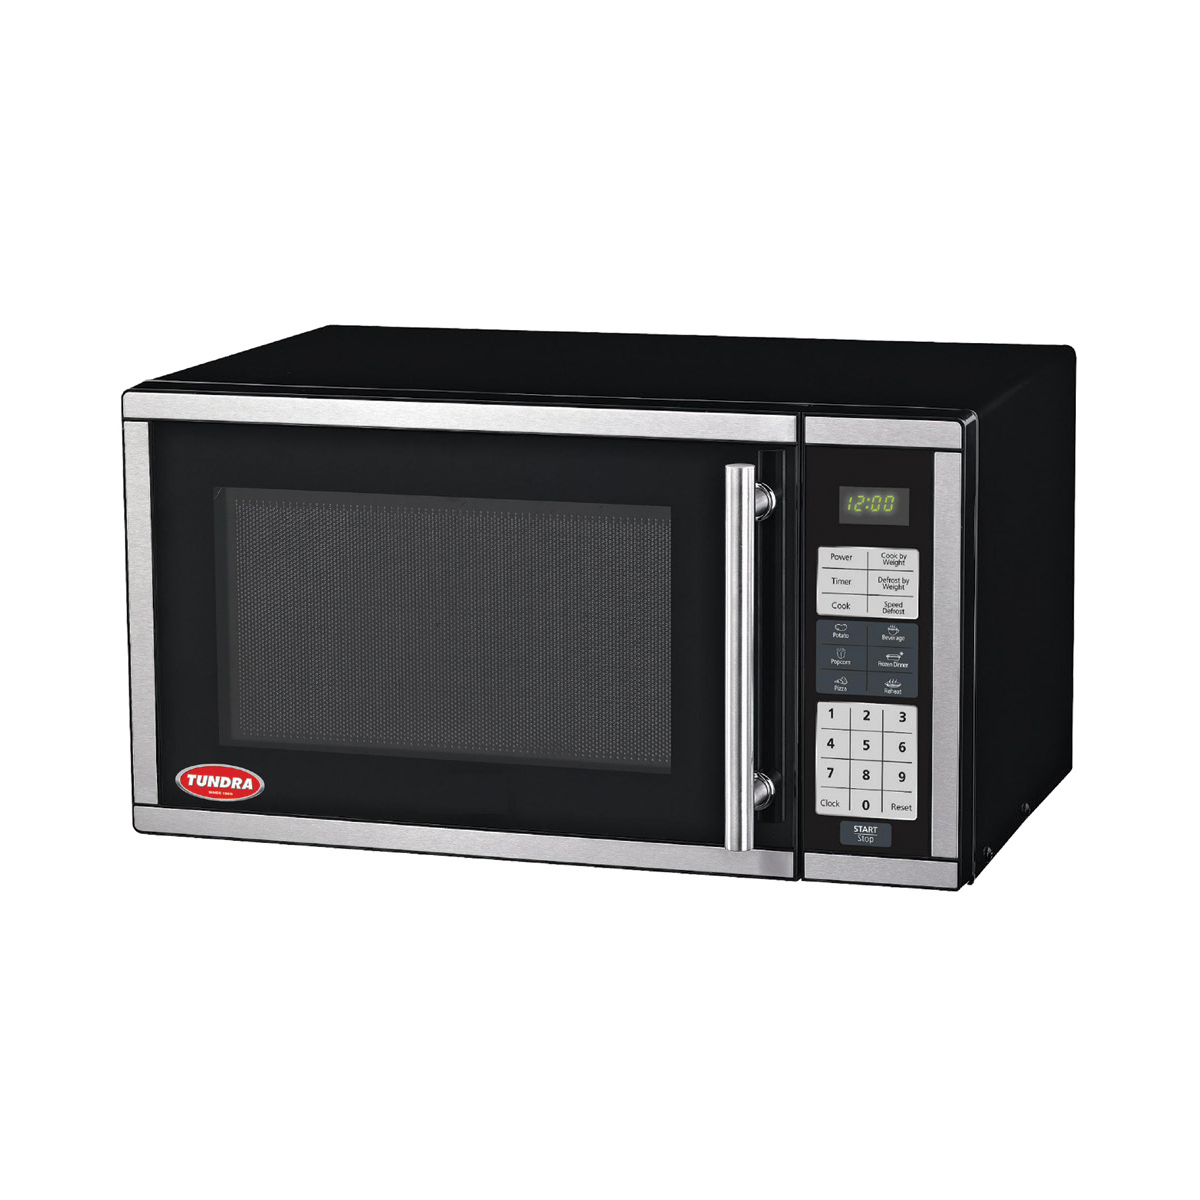 TUNDRA OVEN MICROWAVE Pana-Pacific MW700 SERIES 120 V : - TRUCK MW - -